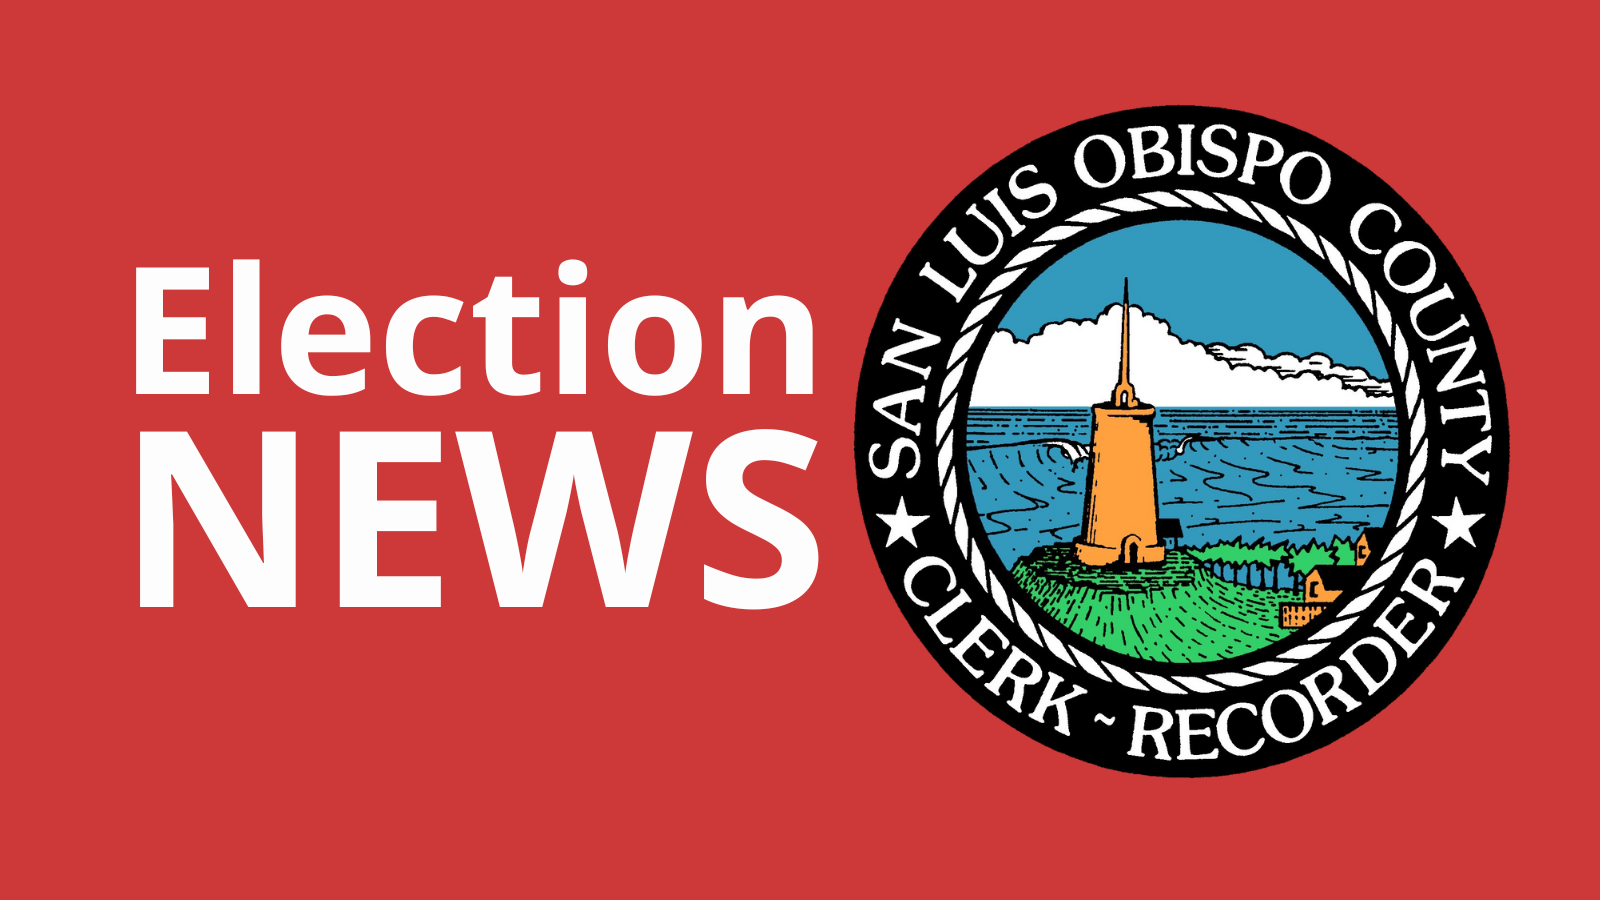 Image includes the official Clerk-Recorder seal next to the words Election News Click to view article, Nomination Period is Open November 13 - December 8, 2023